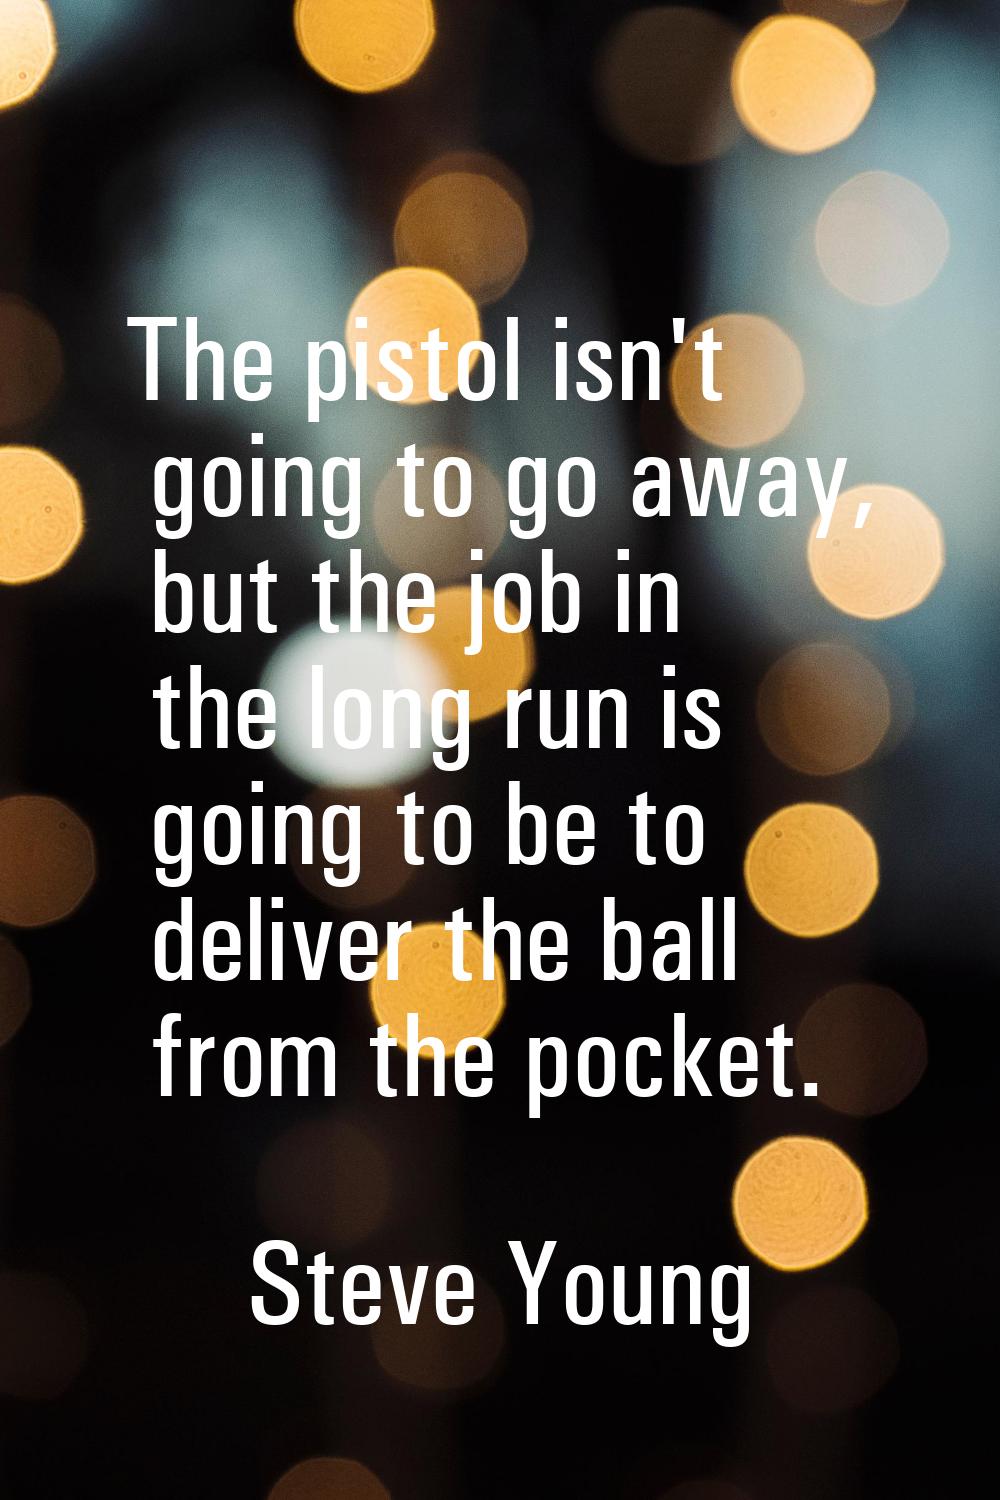 The pistol isn't going to go away, but the job in the long run is going to be to deliver the ball f